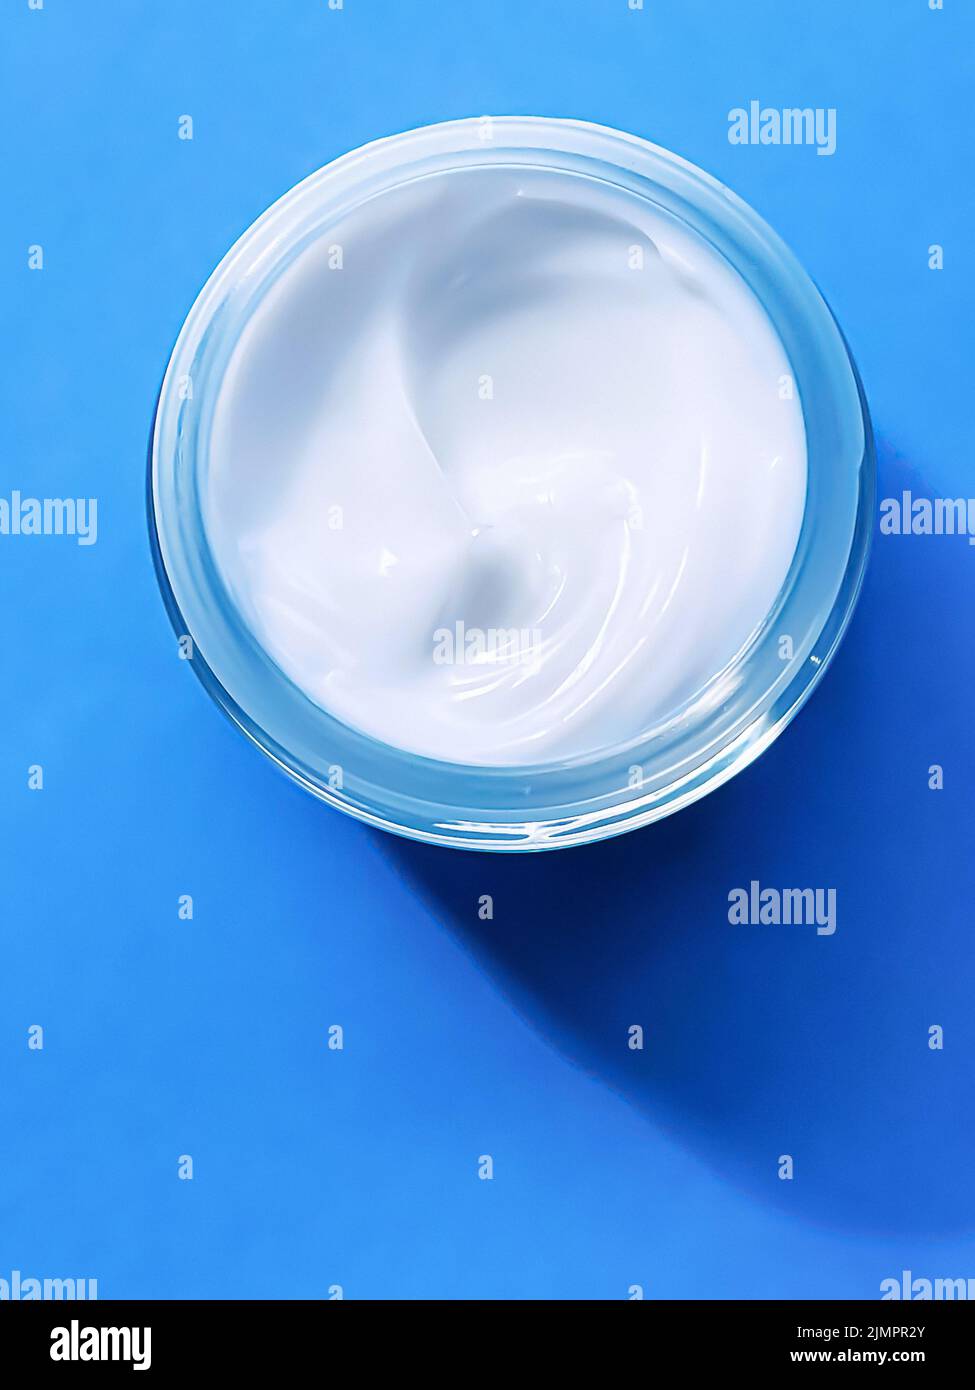 Face cream moisturiser jar as product sample on blue background, beauty and skincare, cosmetic science Stock Photo